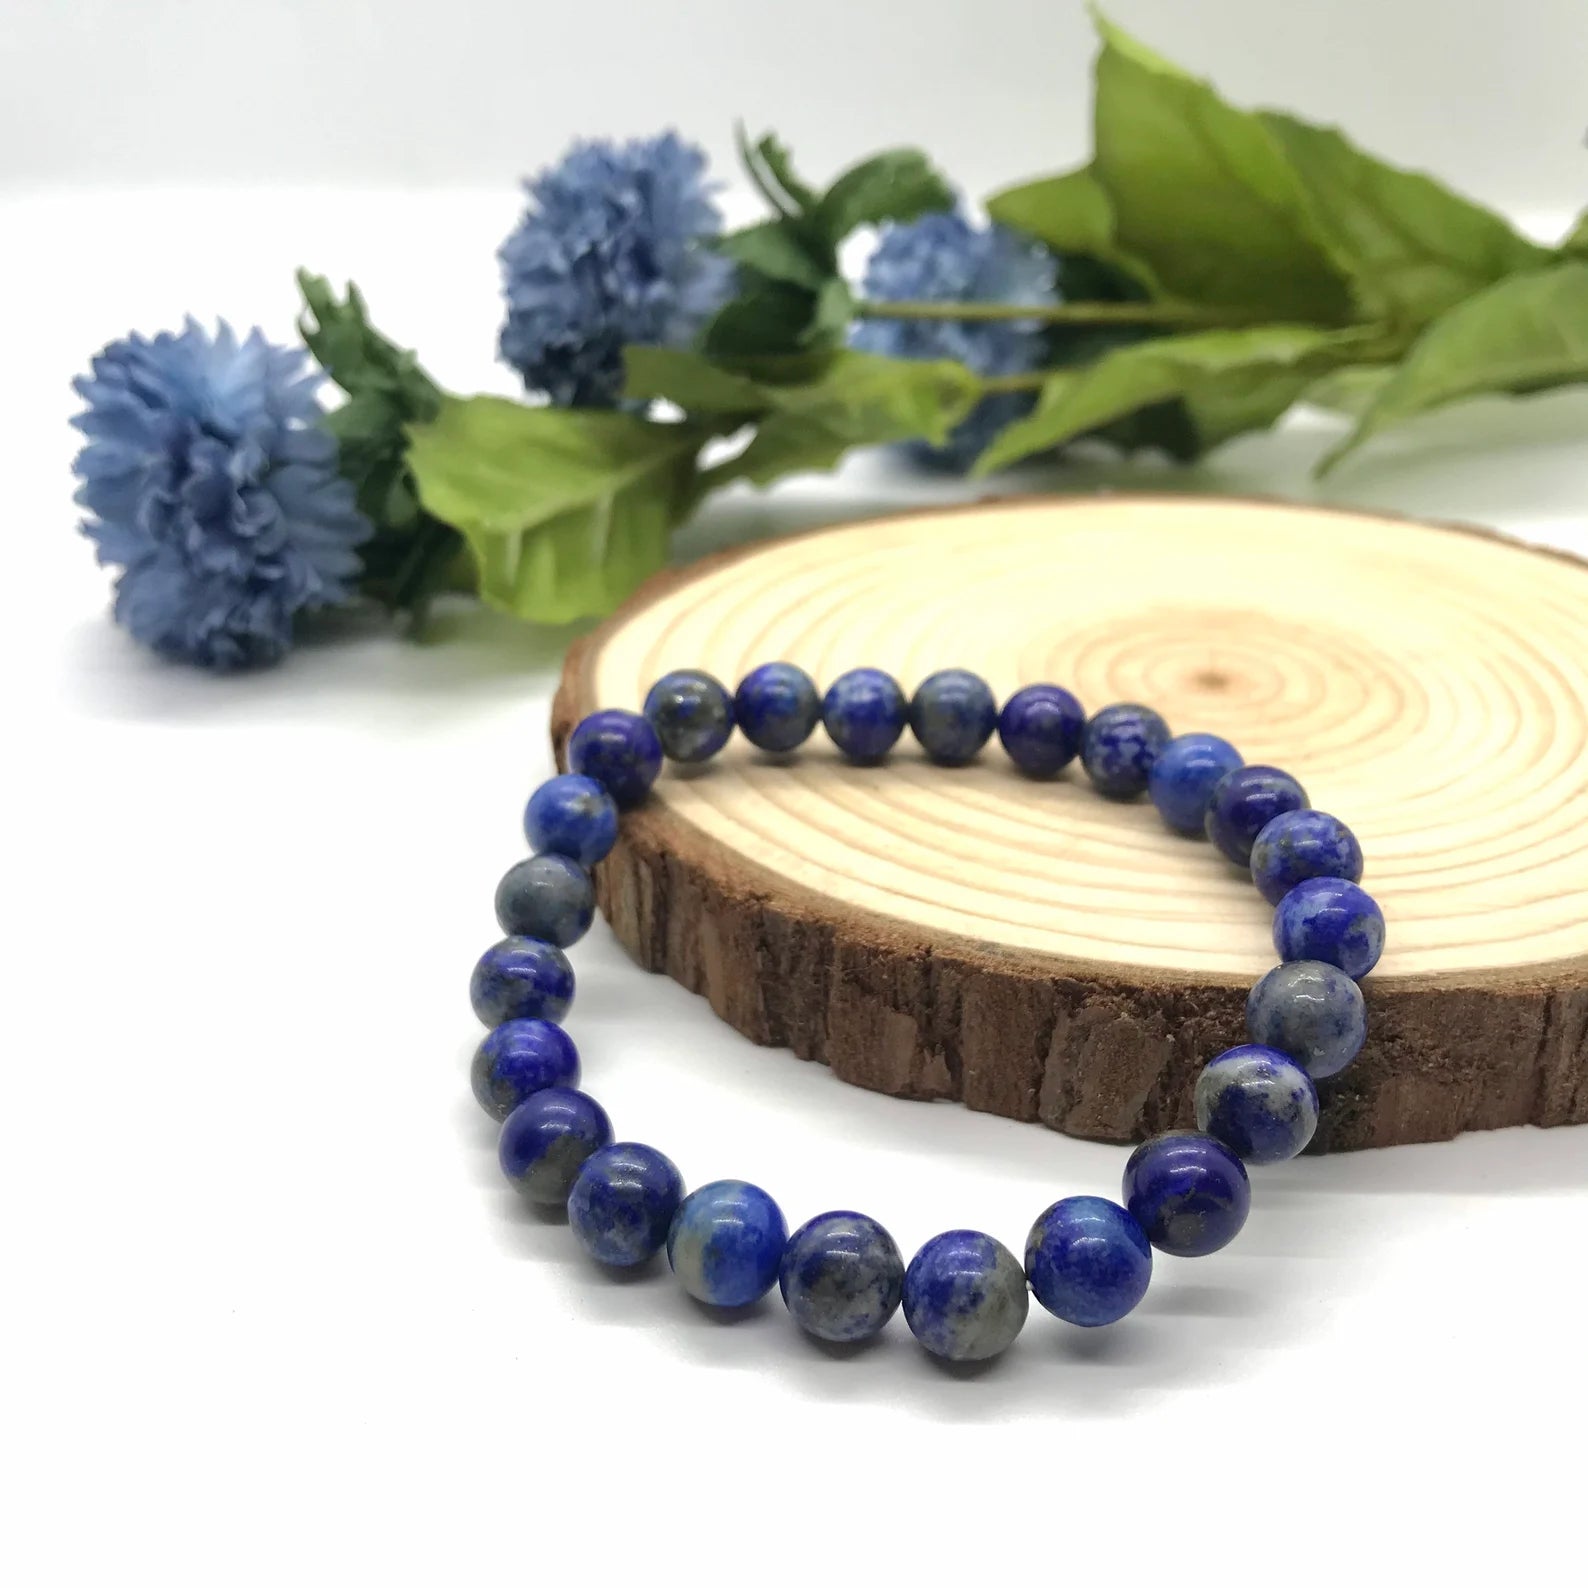 Aura Hygiene - New Lapis Lazuli Beaded Crystal Bracelet! 💙 Available at  $18.99 here ➡️ http://bit.ly/34IECaE Lapis Lazuli Healing Properties and  Benefits Helps with Self Awareness and Intuition Helps connect physical  world